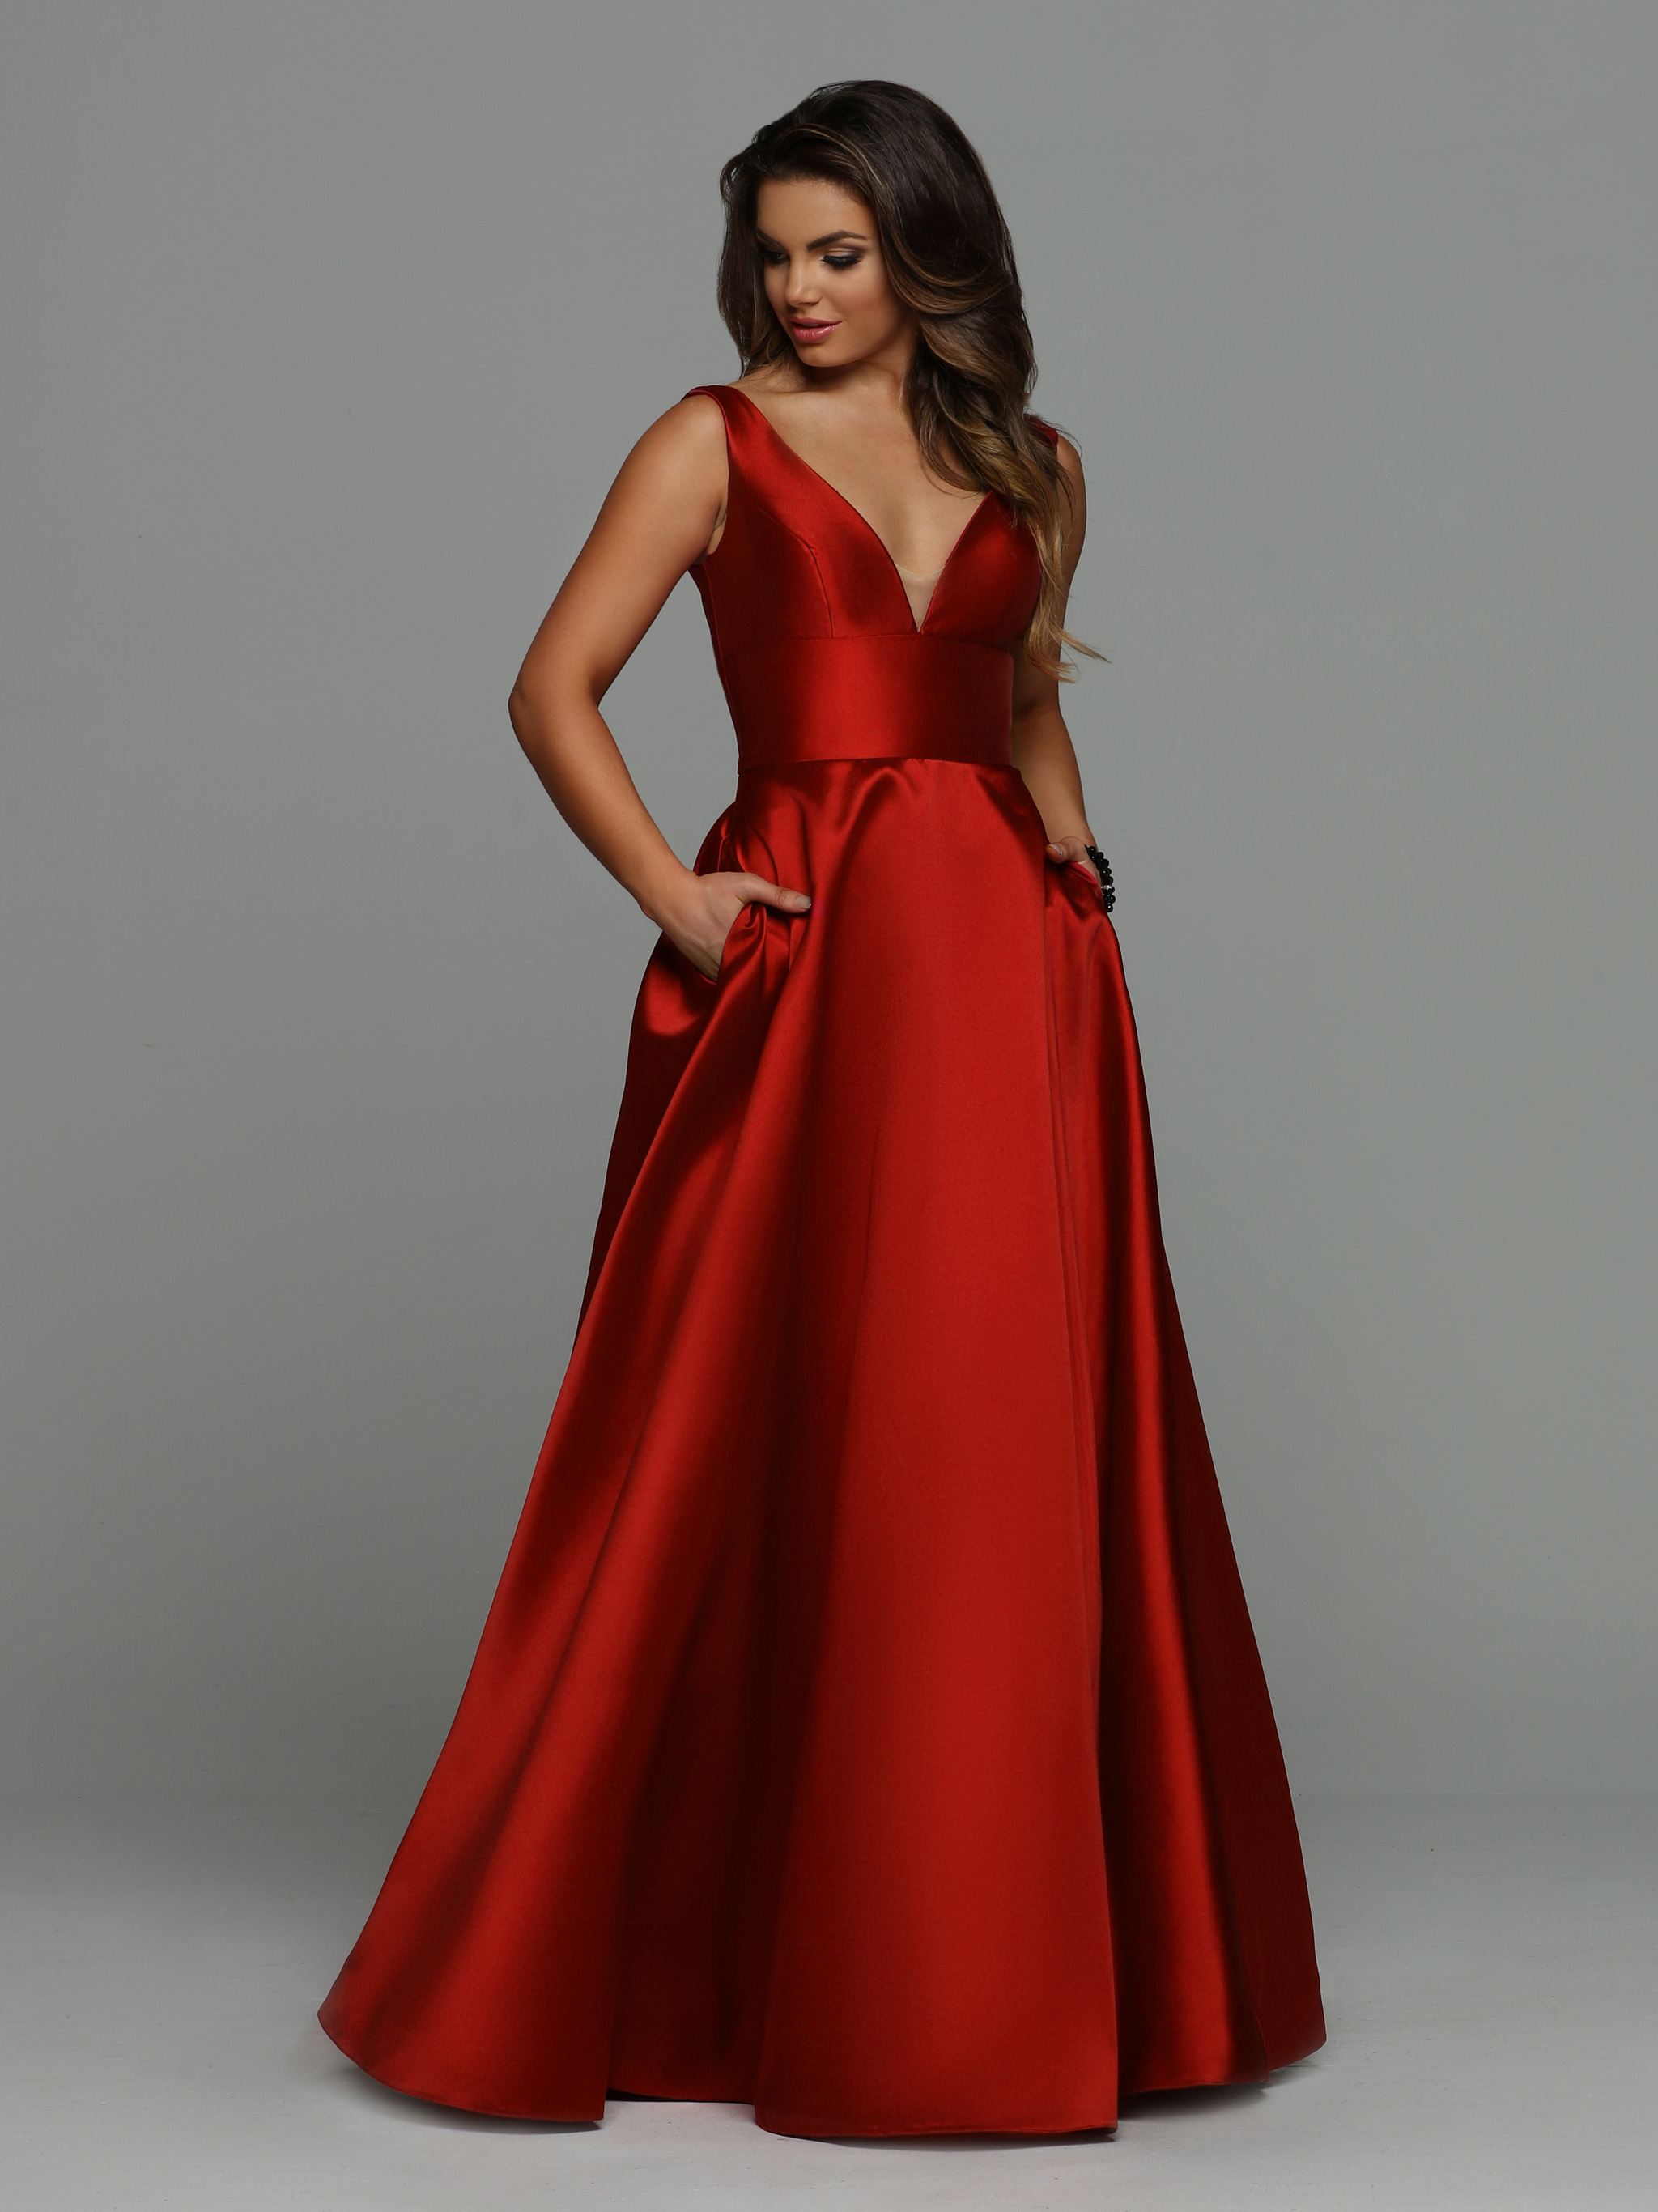 Prom 2019 trends: Red dresses were the hot, bold look in Knoxville